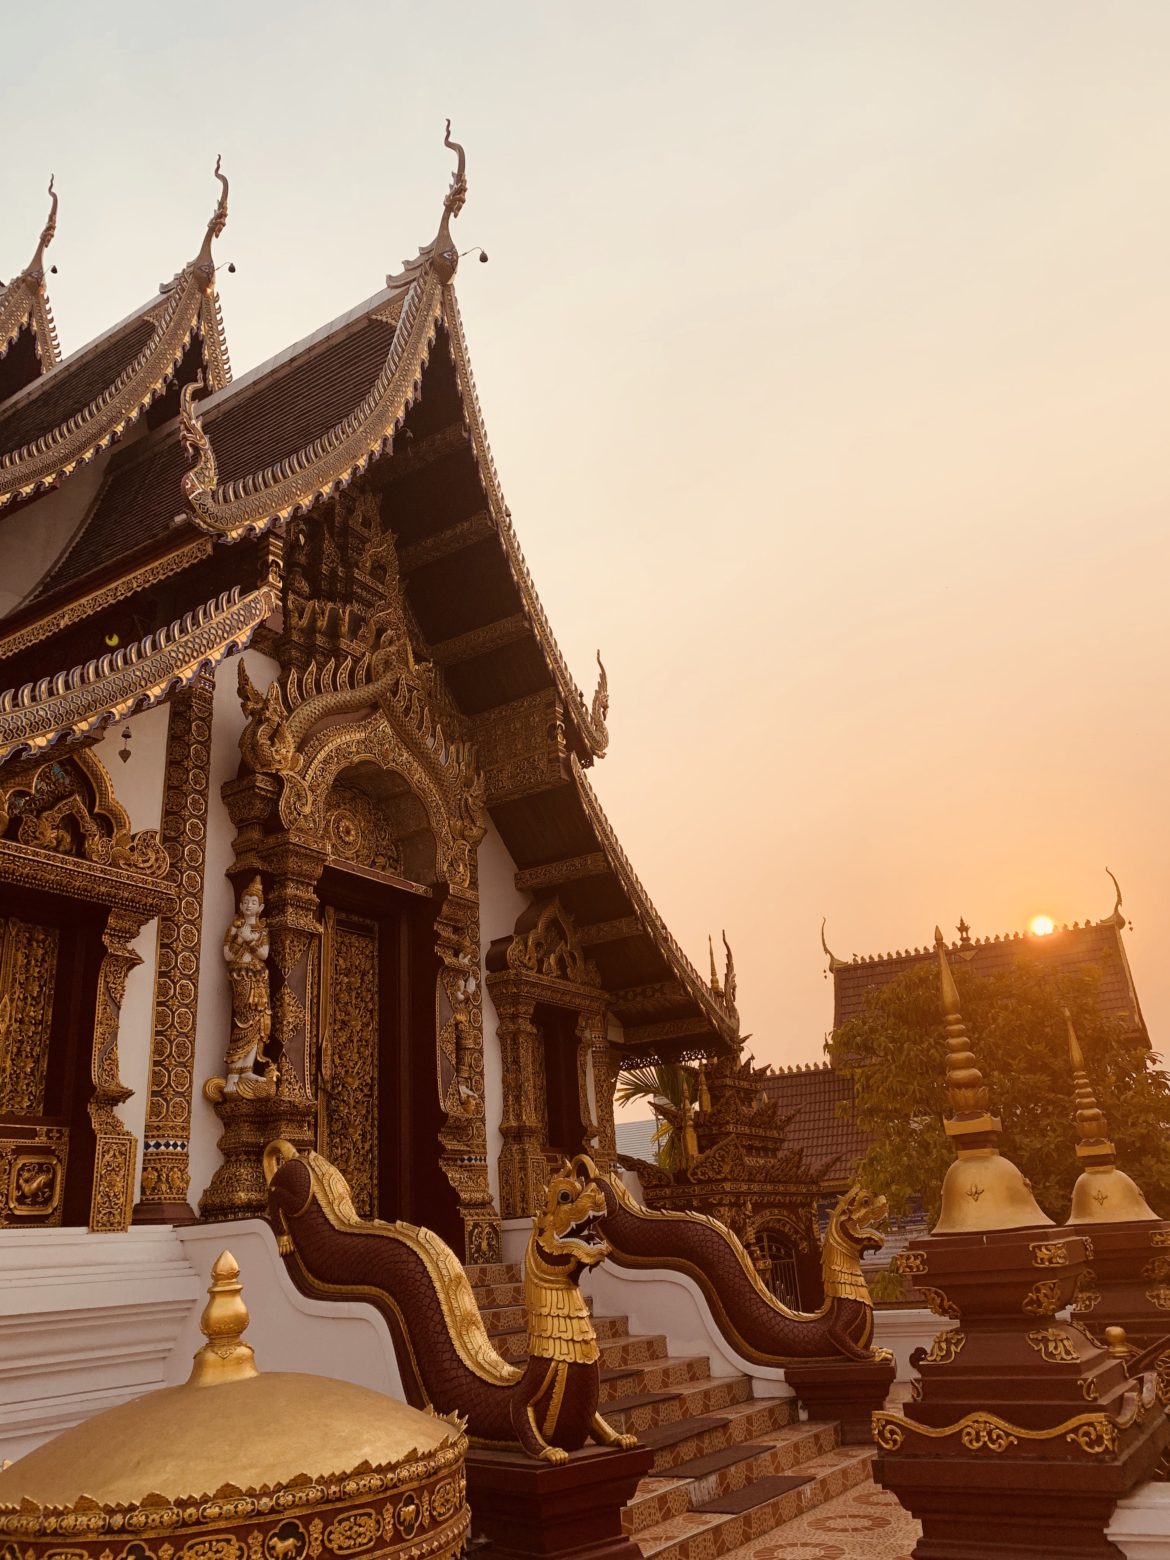 How To Spend 48 Hours In Chiang Mai Thailand • Mariannyc